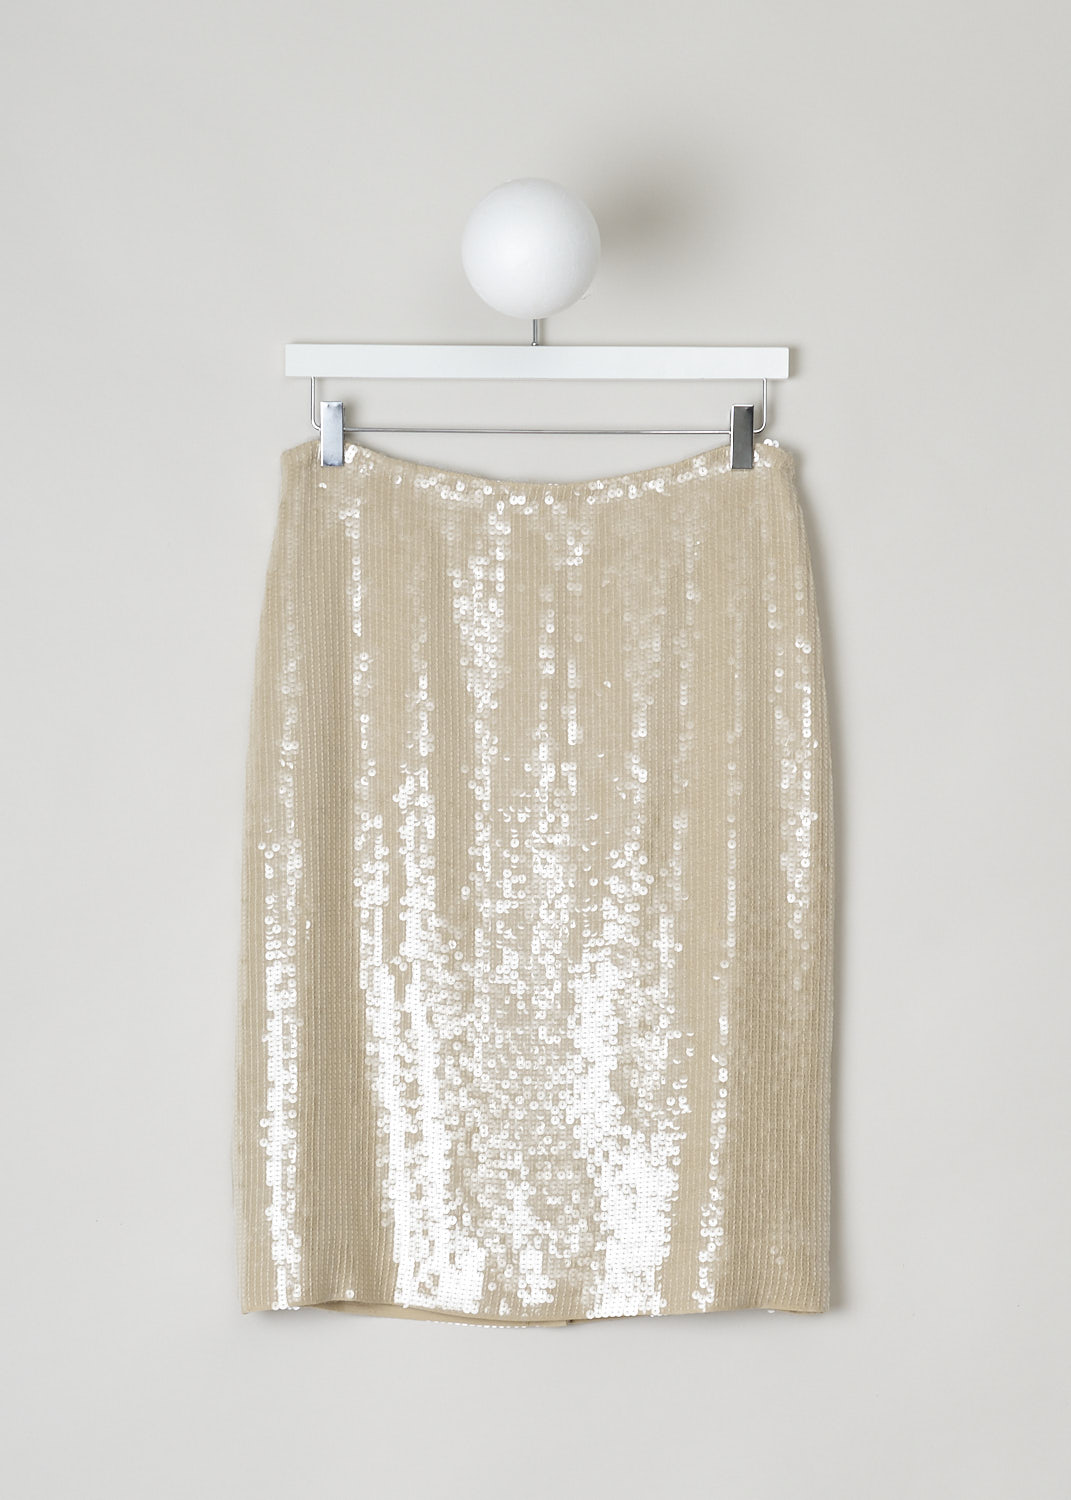 NILI LOTAN, KHAKI COLORED SEQUIN PENCIL SKIRT, 12054_W1226, Beige, Front, This khaki colored pencil skirt is fully covered with see-through sequin. In the back, a concealed zip functions as the closure option. Also in the back, a centre slit can be found. The skirt is fully lined.
